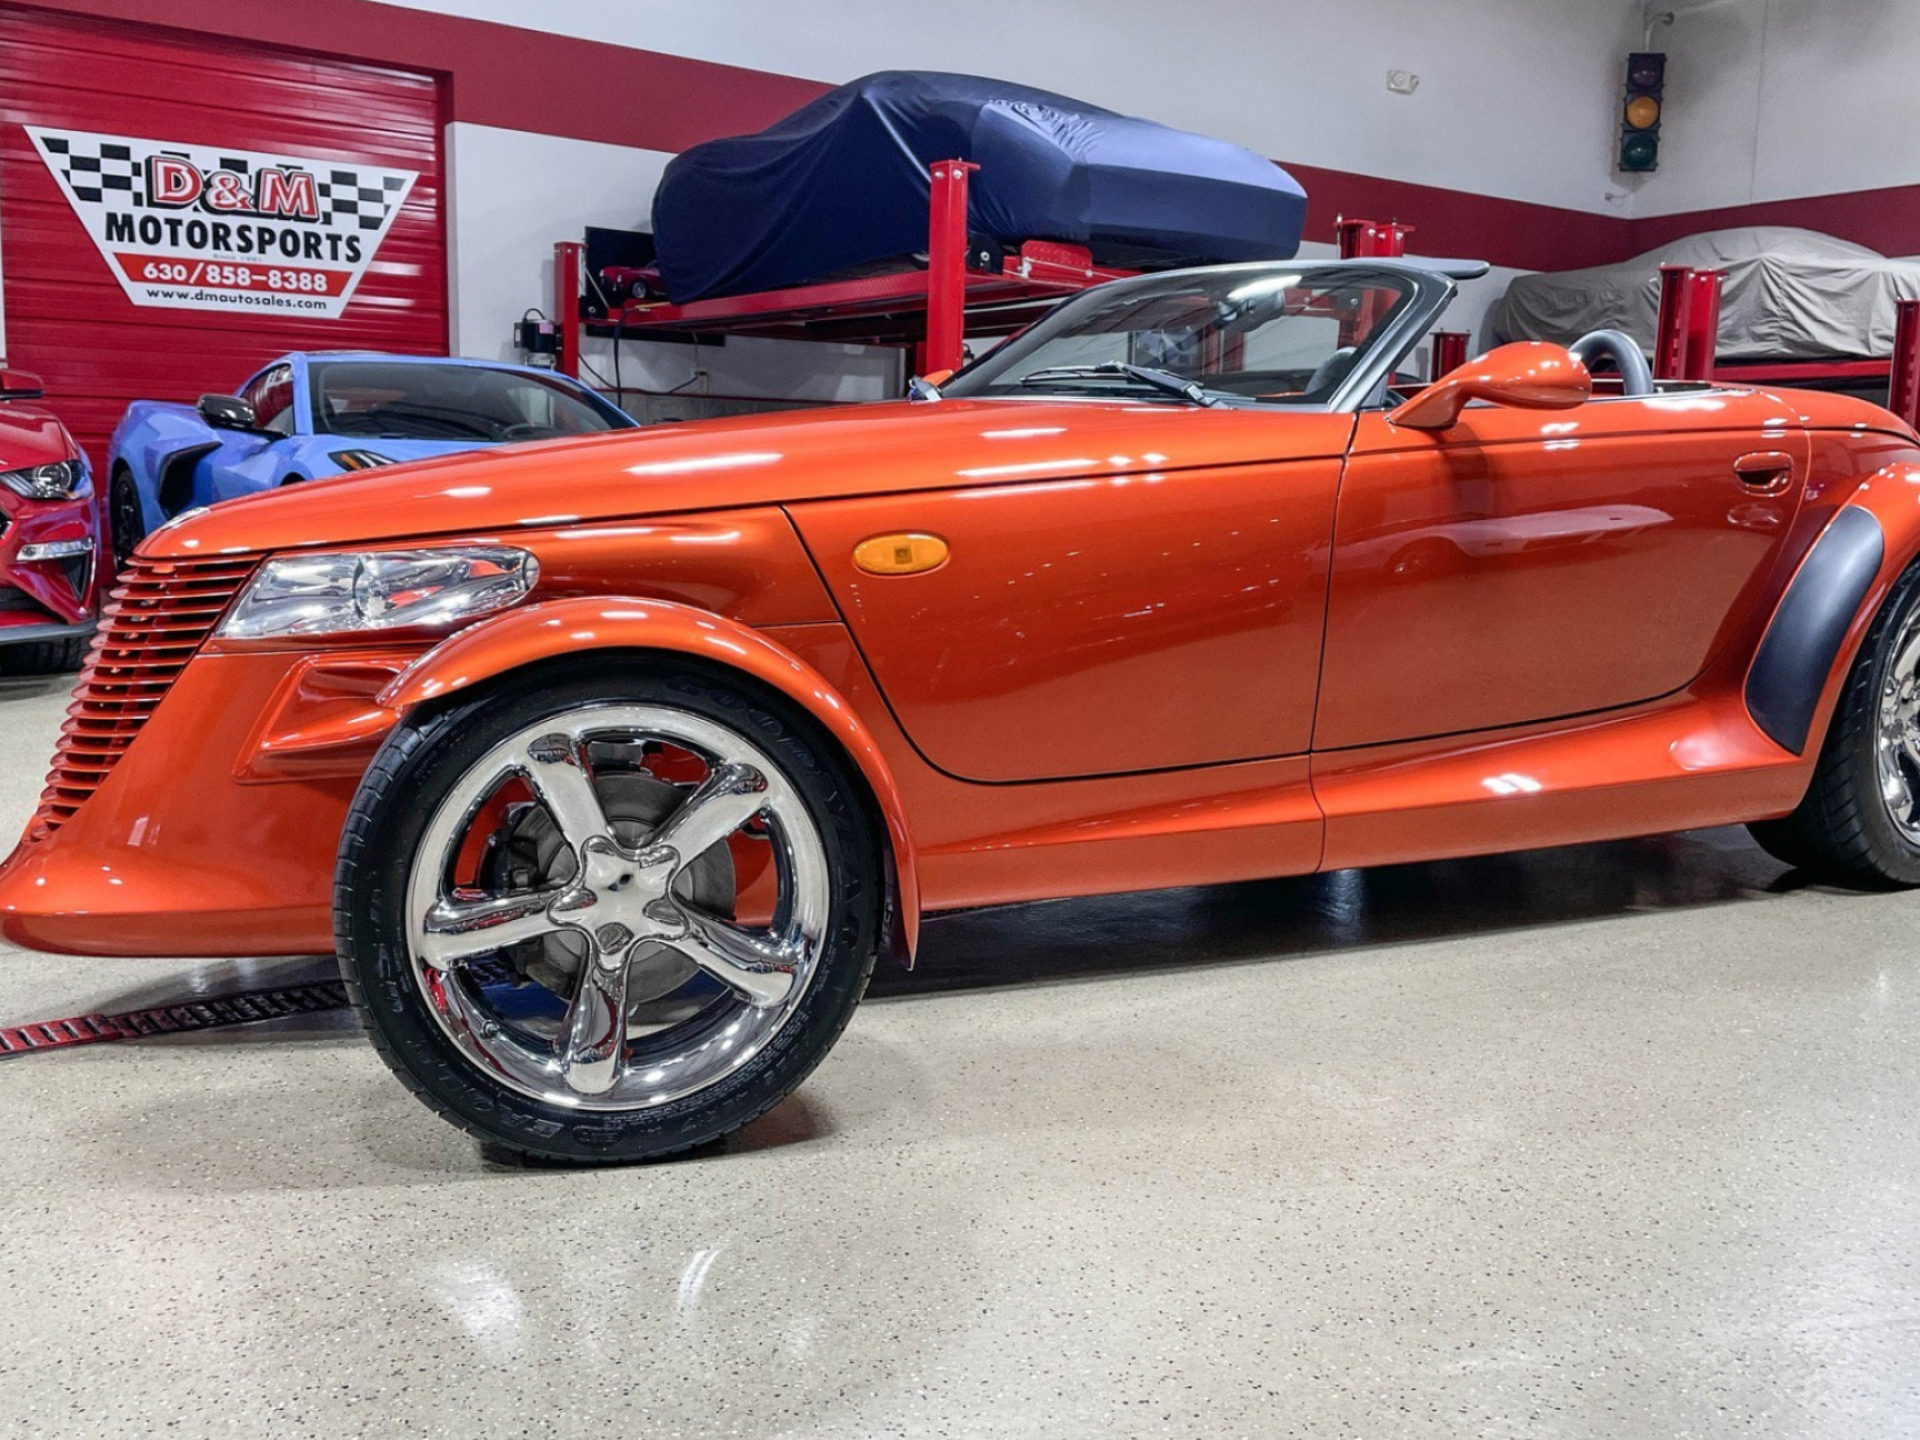 Plymouth Prowler, Genuine pre-owned cars, Available in Oak Park, IL, Autotrader certified, 1920x1440 HD Desktop